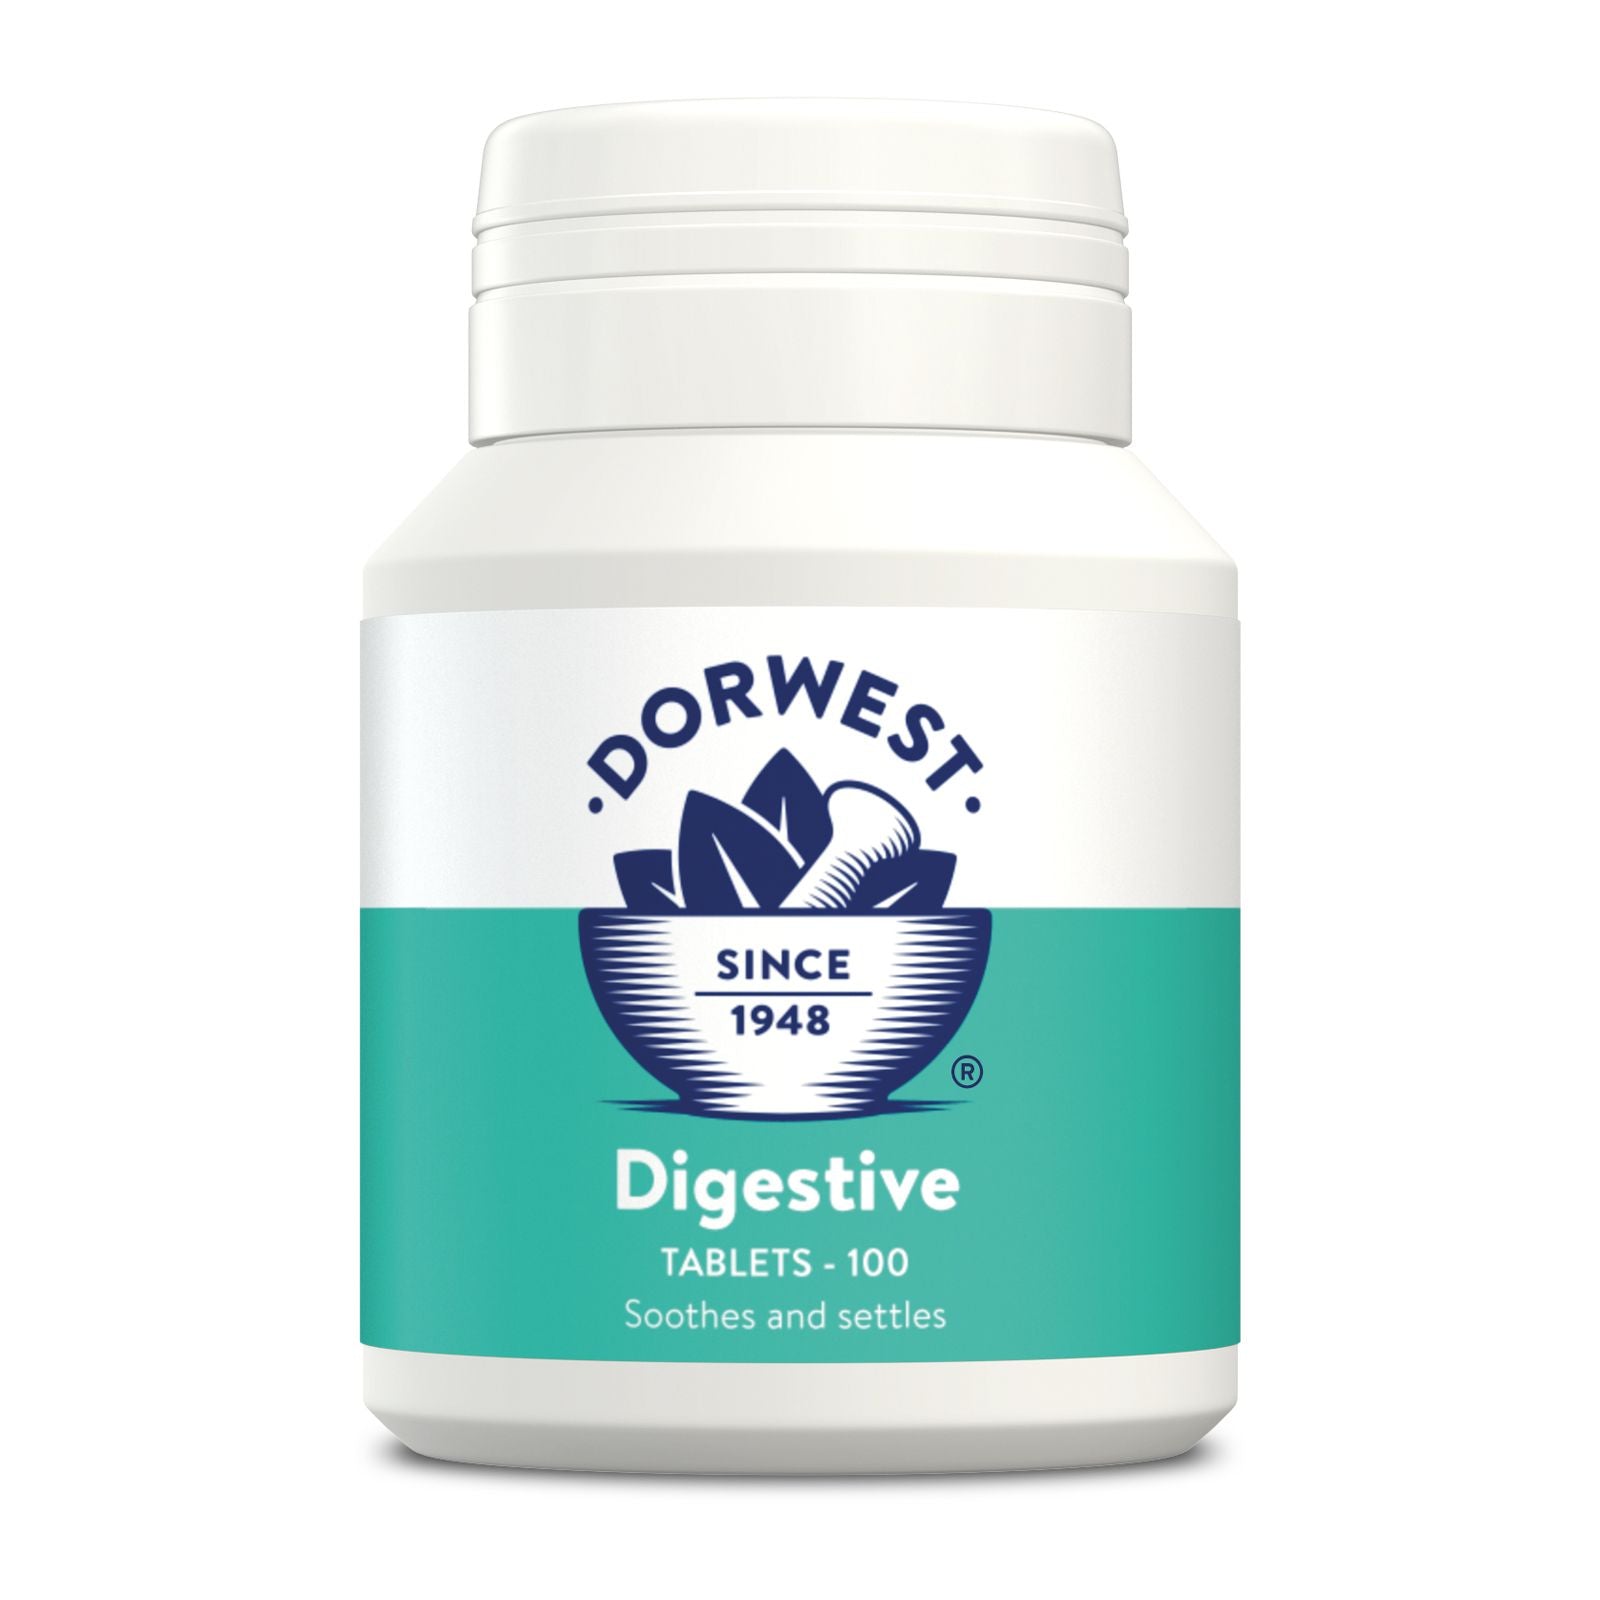 Dorwest Digestive Tablets For Dogs & Cats